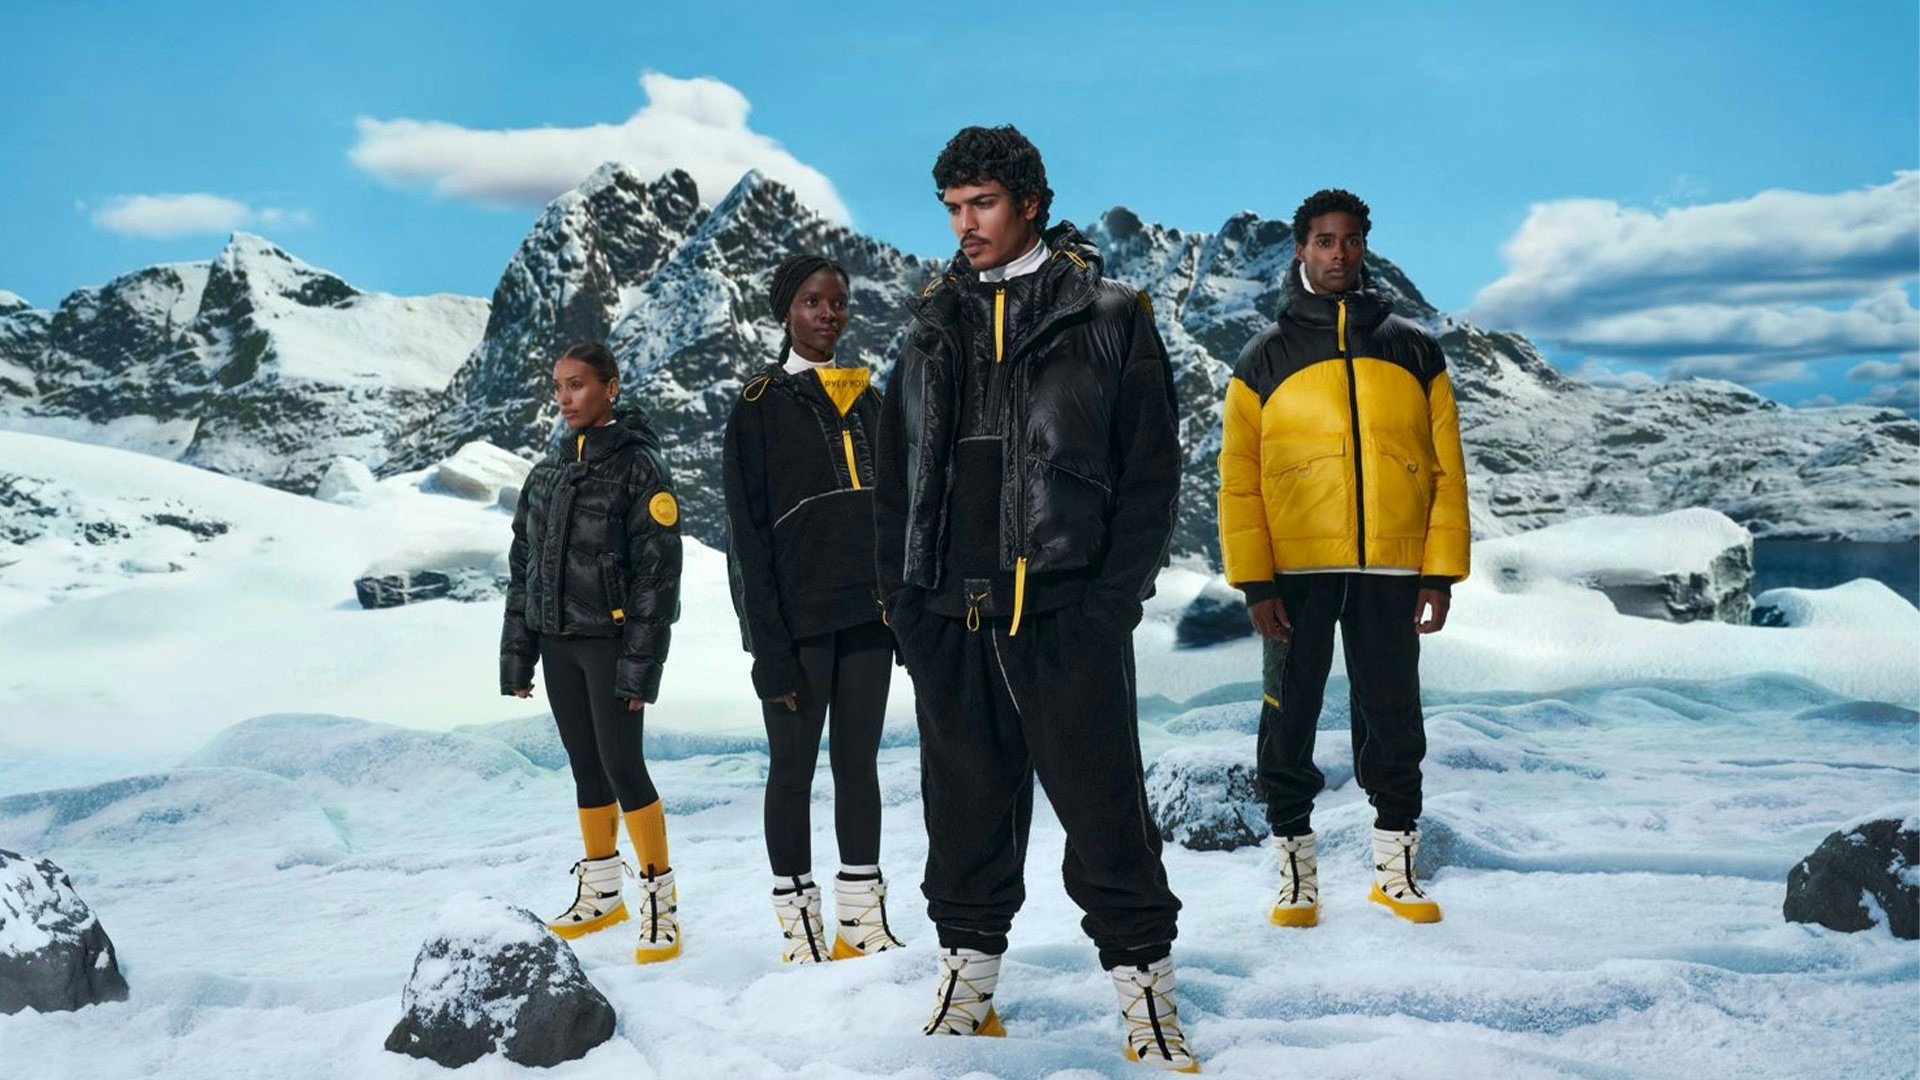 Canada Goose taps Pyer Moss for latest luxury fashion outerwear offering. Photo: Canada Goose